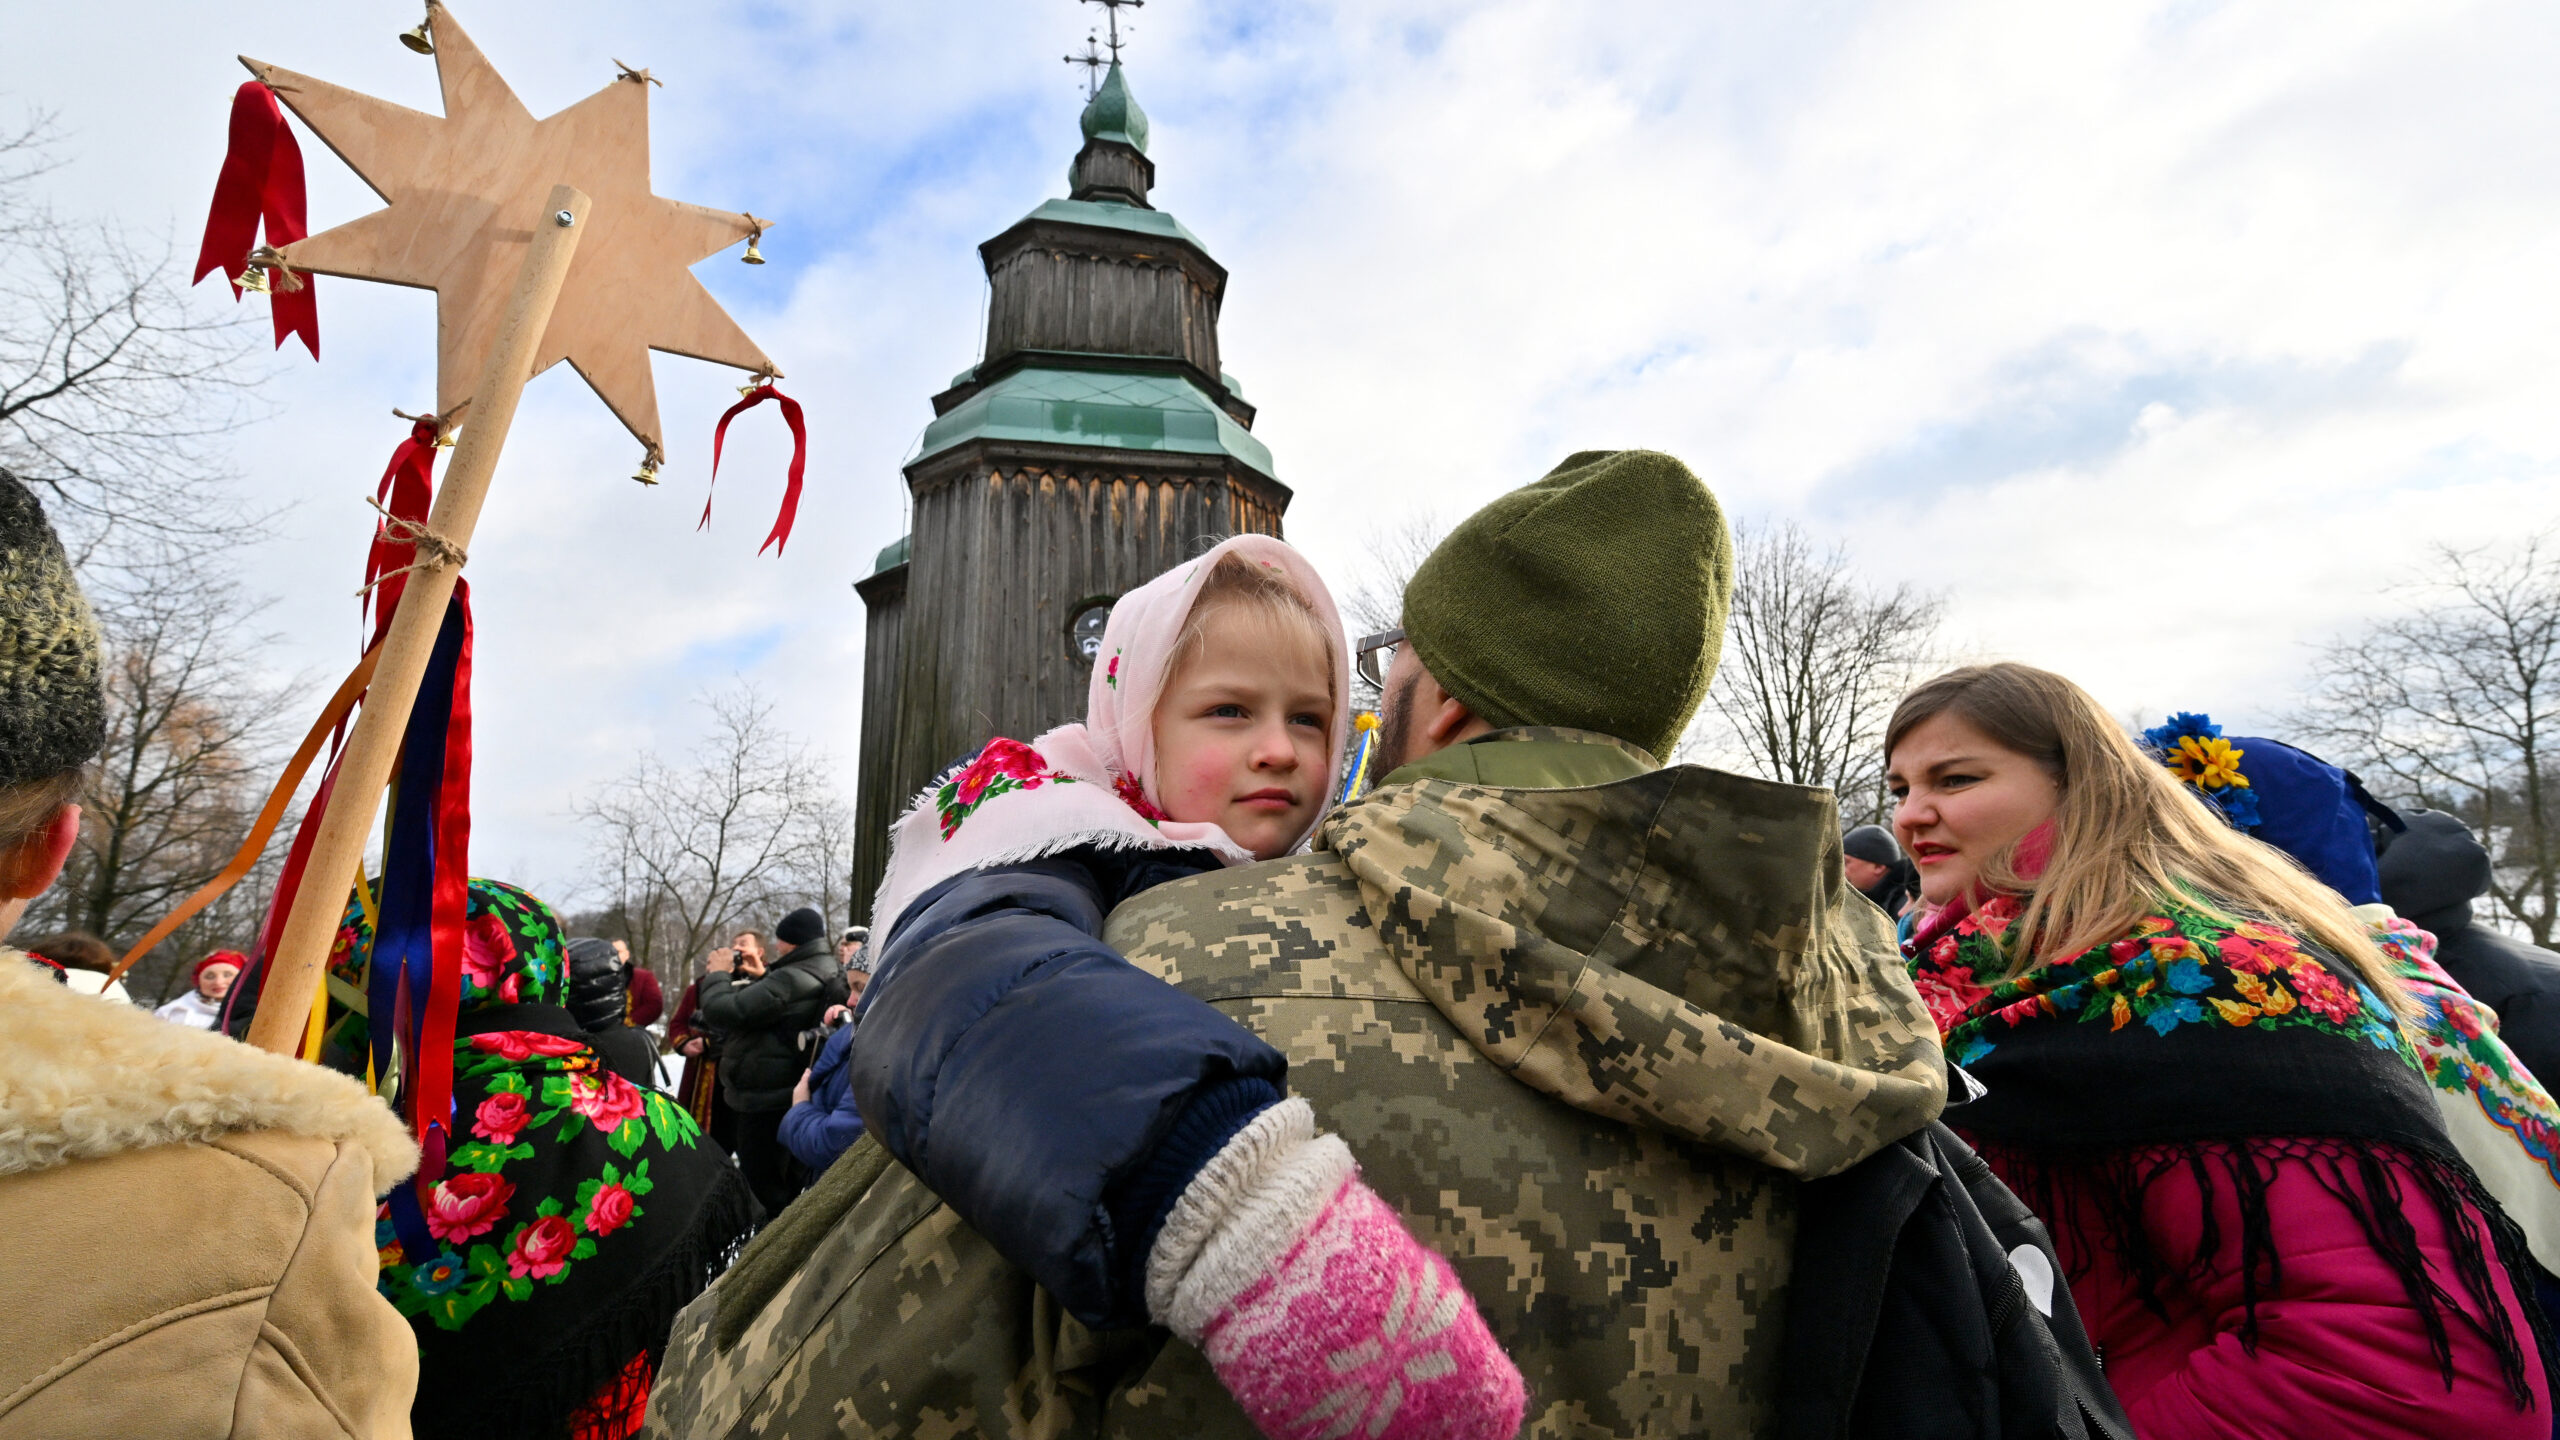 Breaking with tradition, Ukrainians celebrate Christmas on Dec. 25 this year